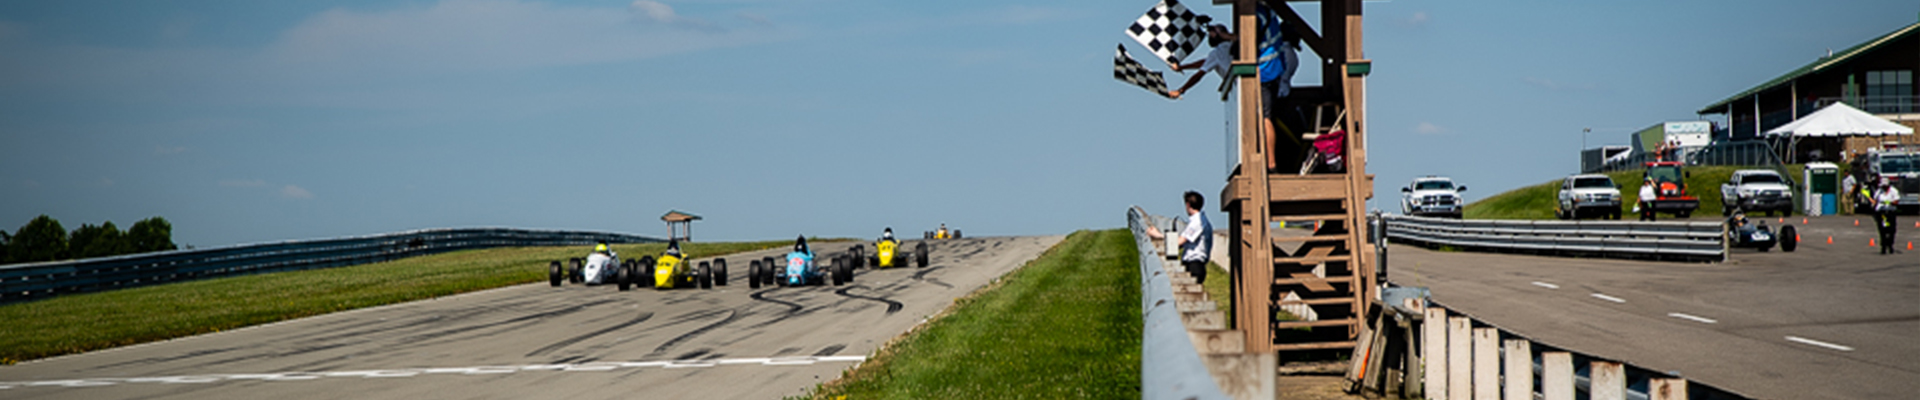 CMP and Mid-Ohio Race Reports